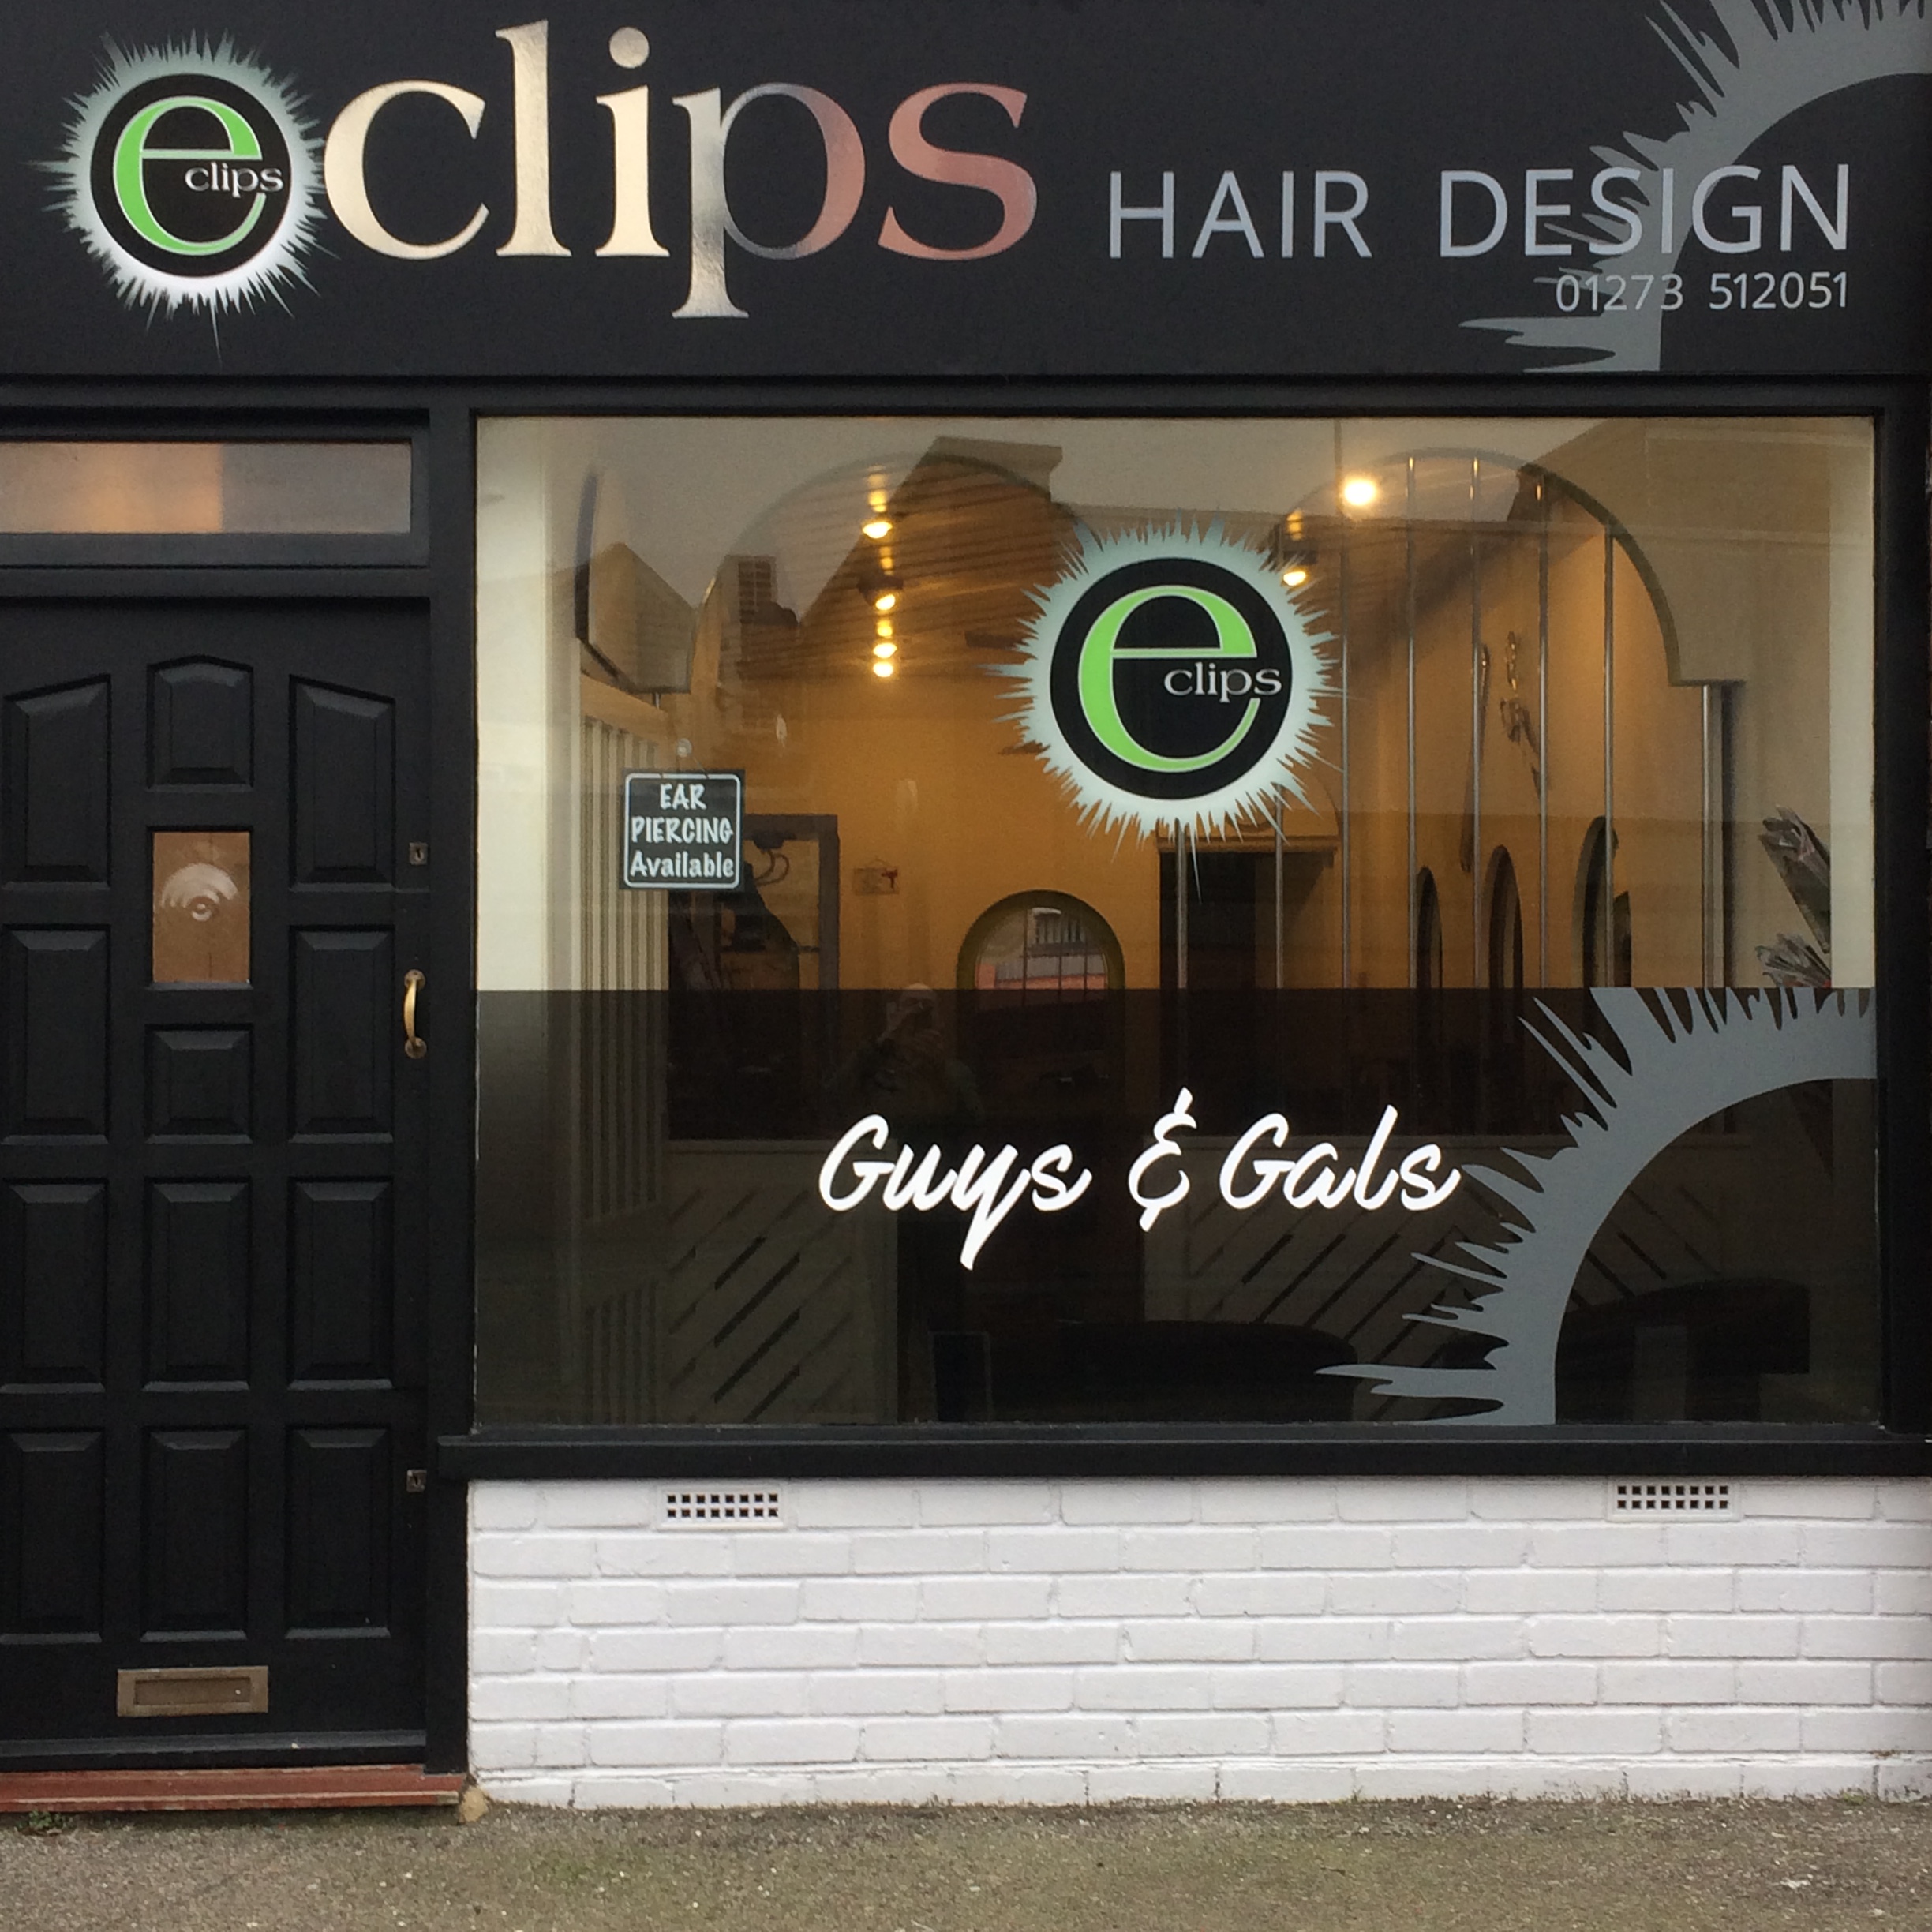 Eclips Hairdressing - Hairdressing & colouring specialists, Newhaven, UK